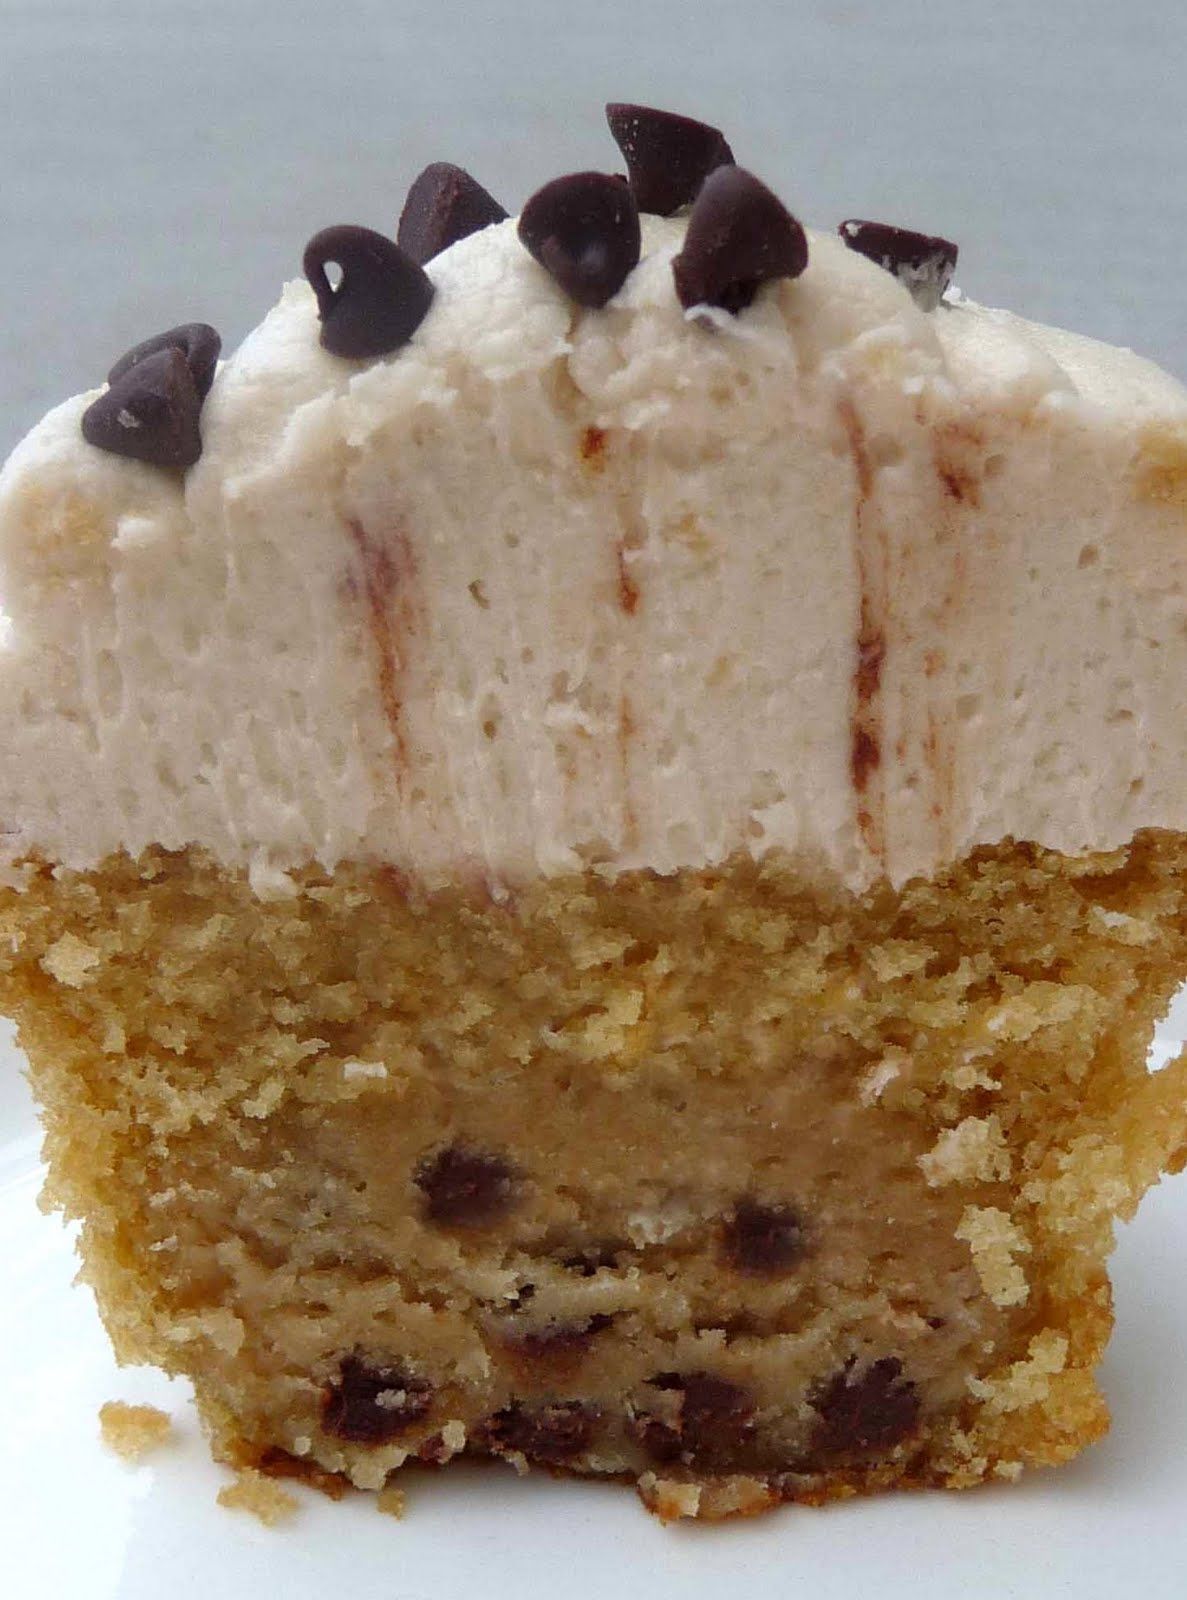 Cookie Dough Cupcakes with Cookie Dough Buttercream frosting. Wow, possible cook